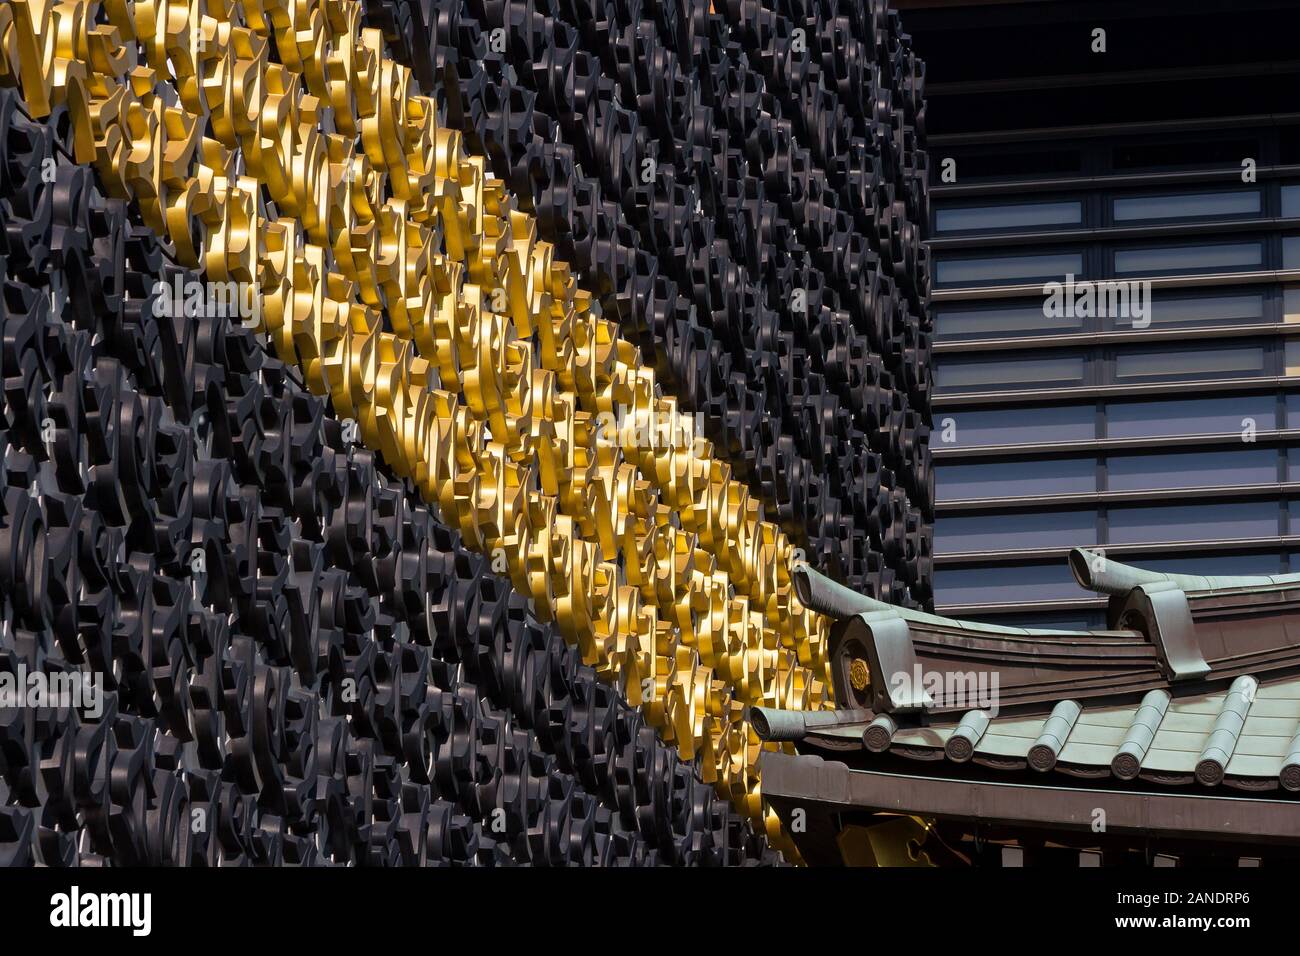 Detail image of the Roof of Fudoson Temple in in front of black and gold Sanskrit characters. Monzen-Nakacho, Tokyo, Japan. Stock Photo